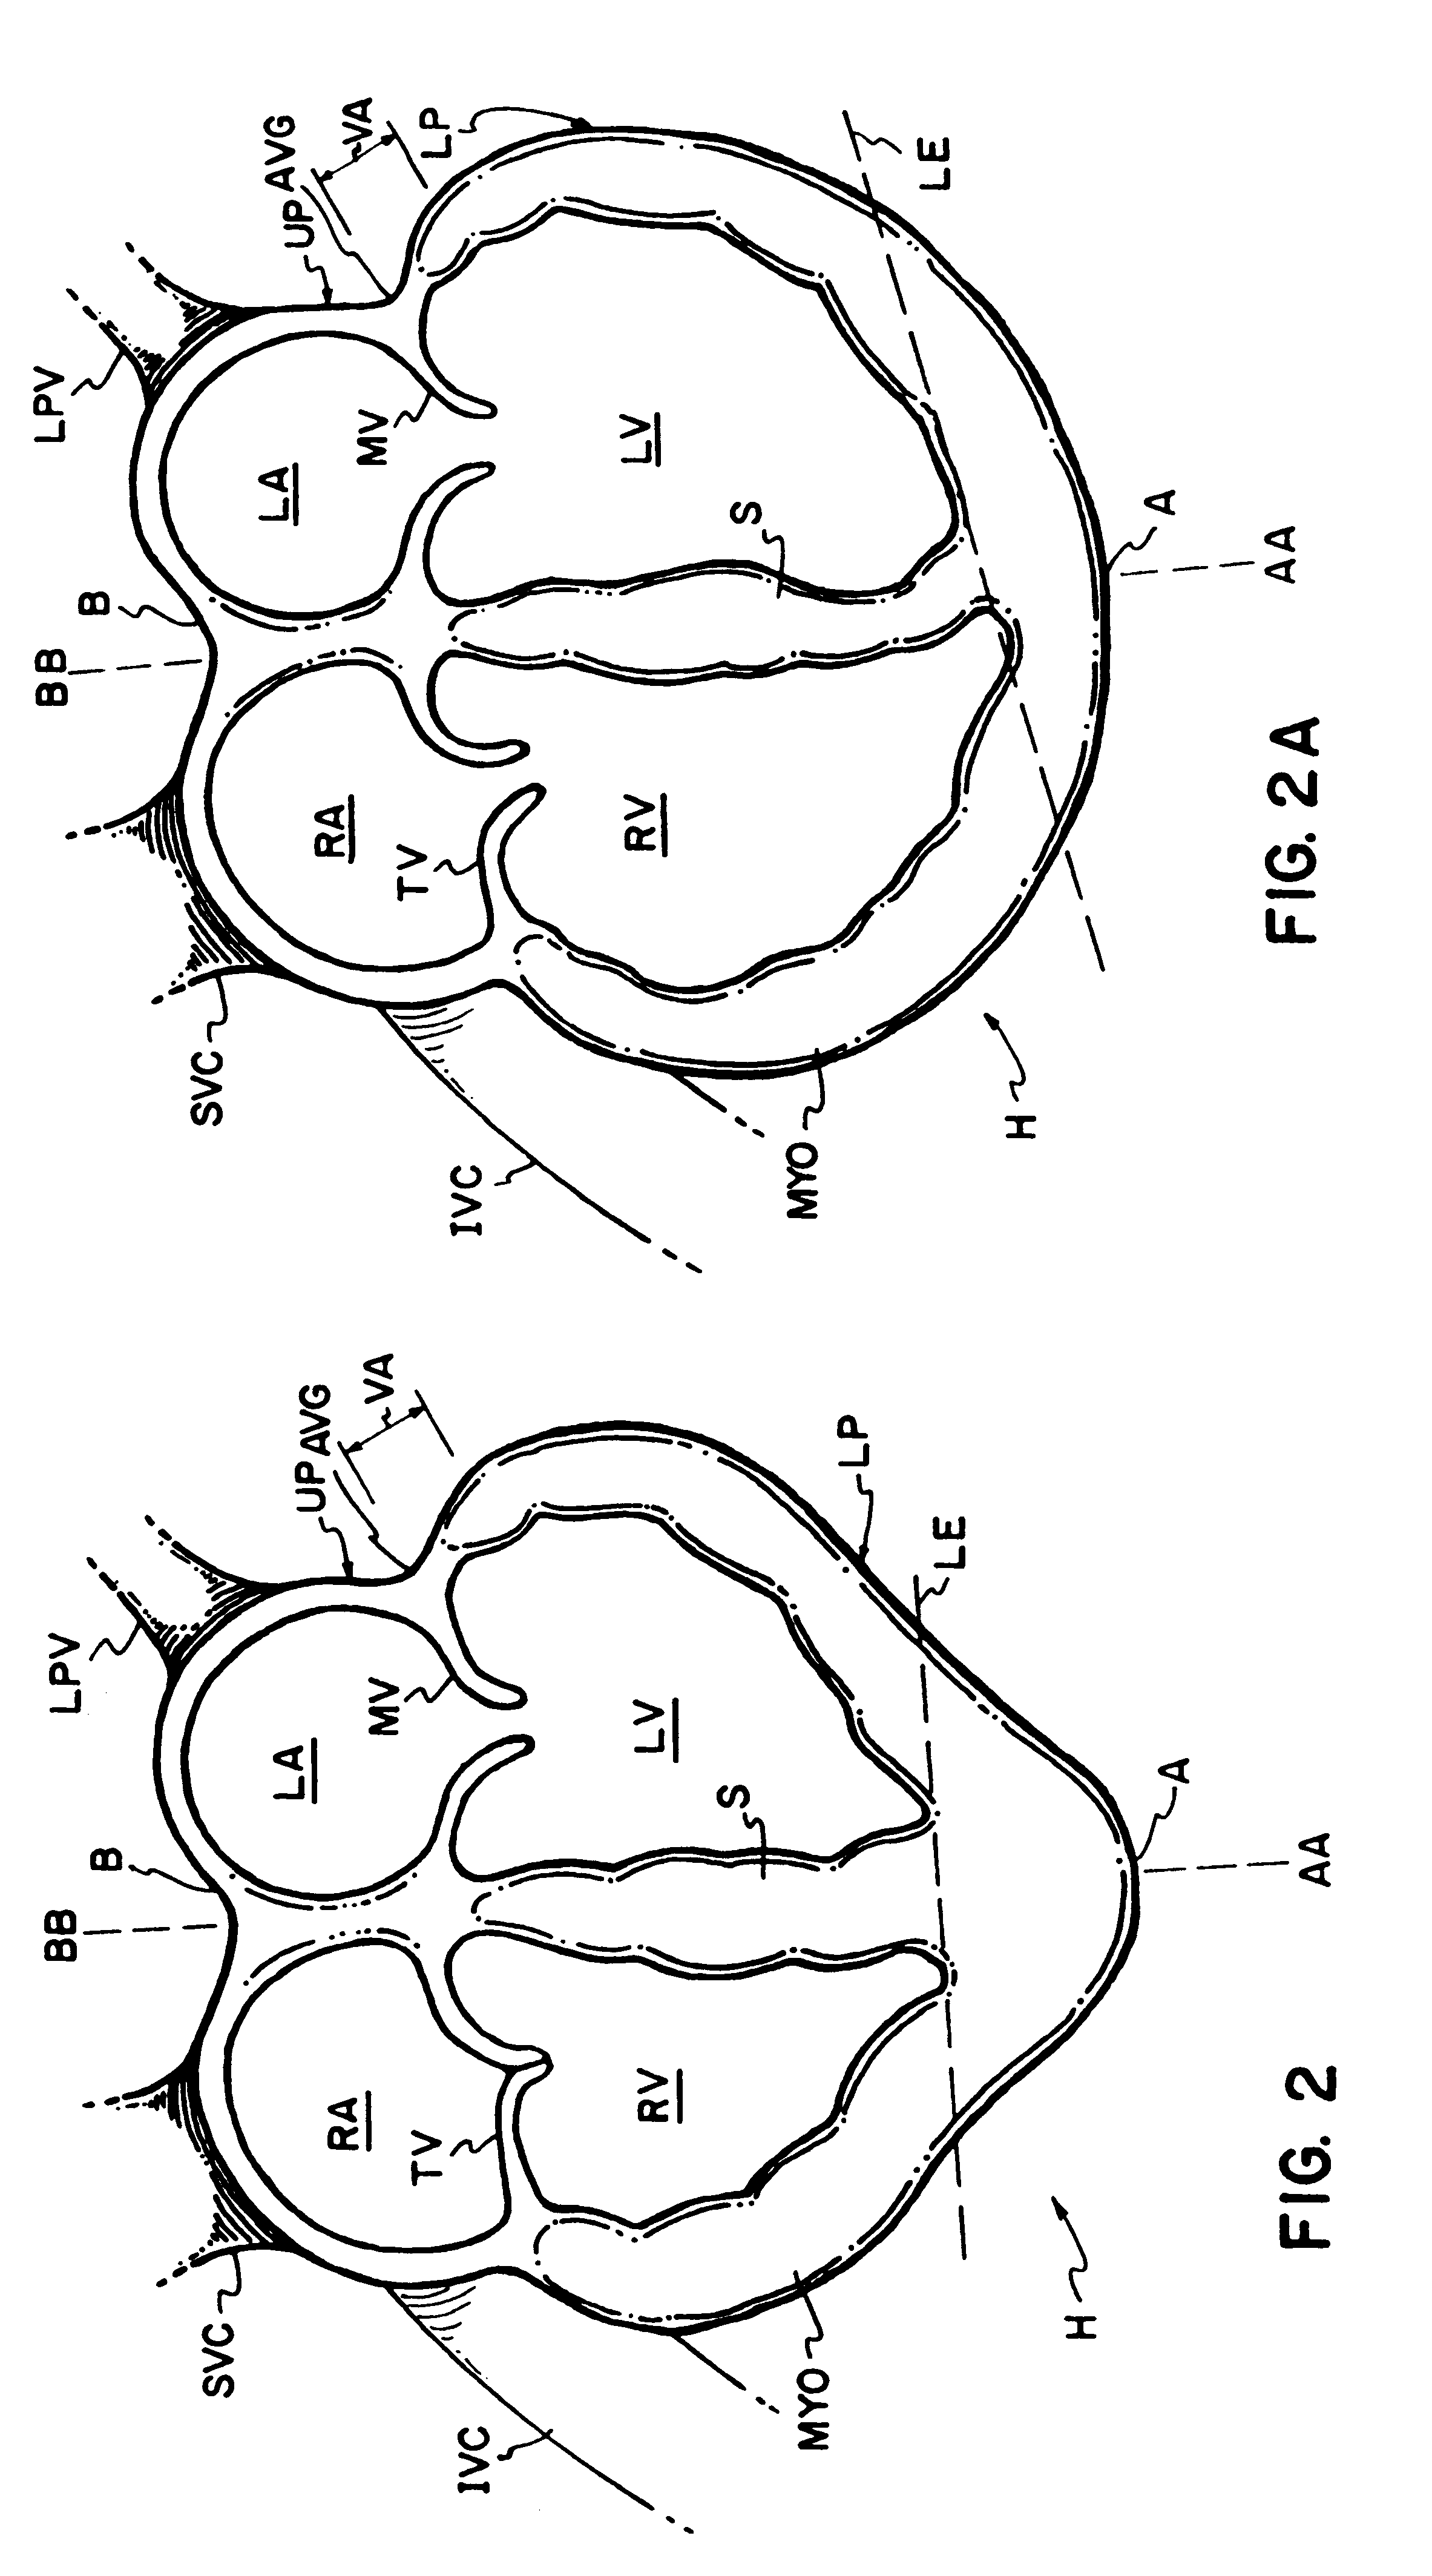 Cardiac constraint with draw string tensioning